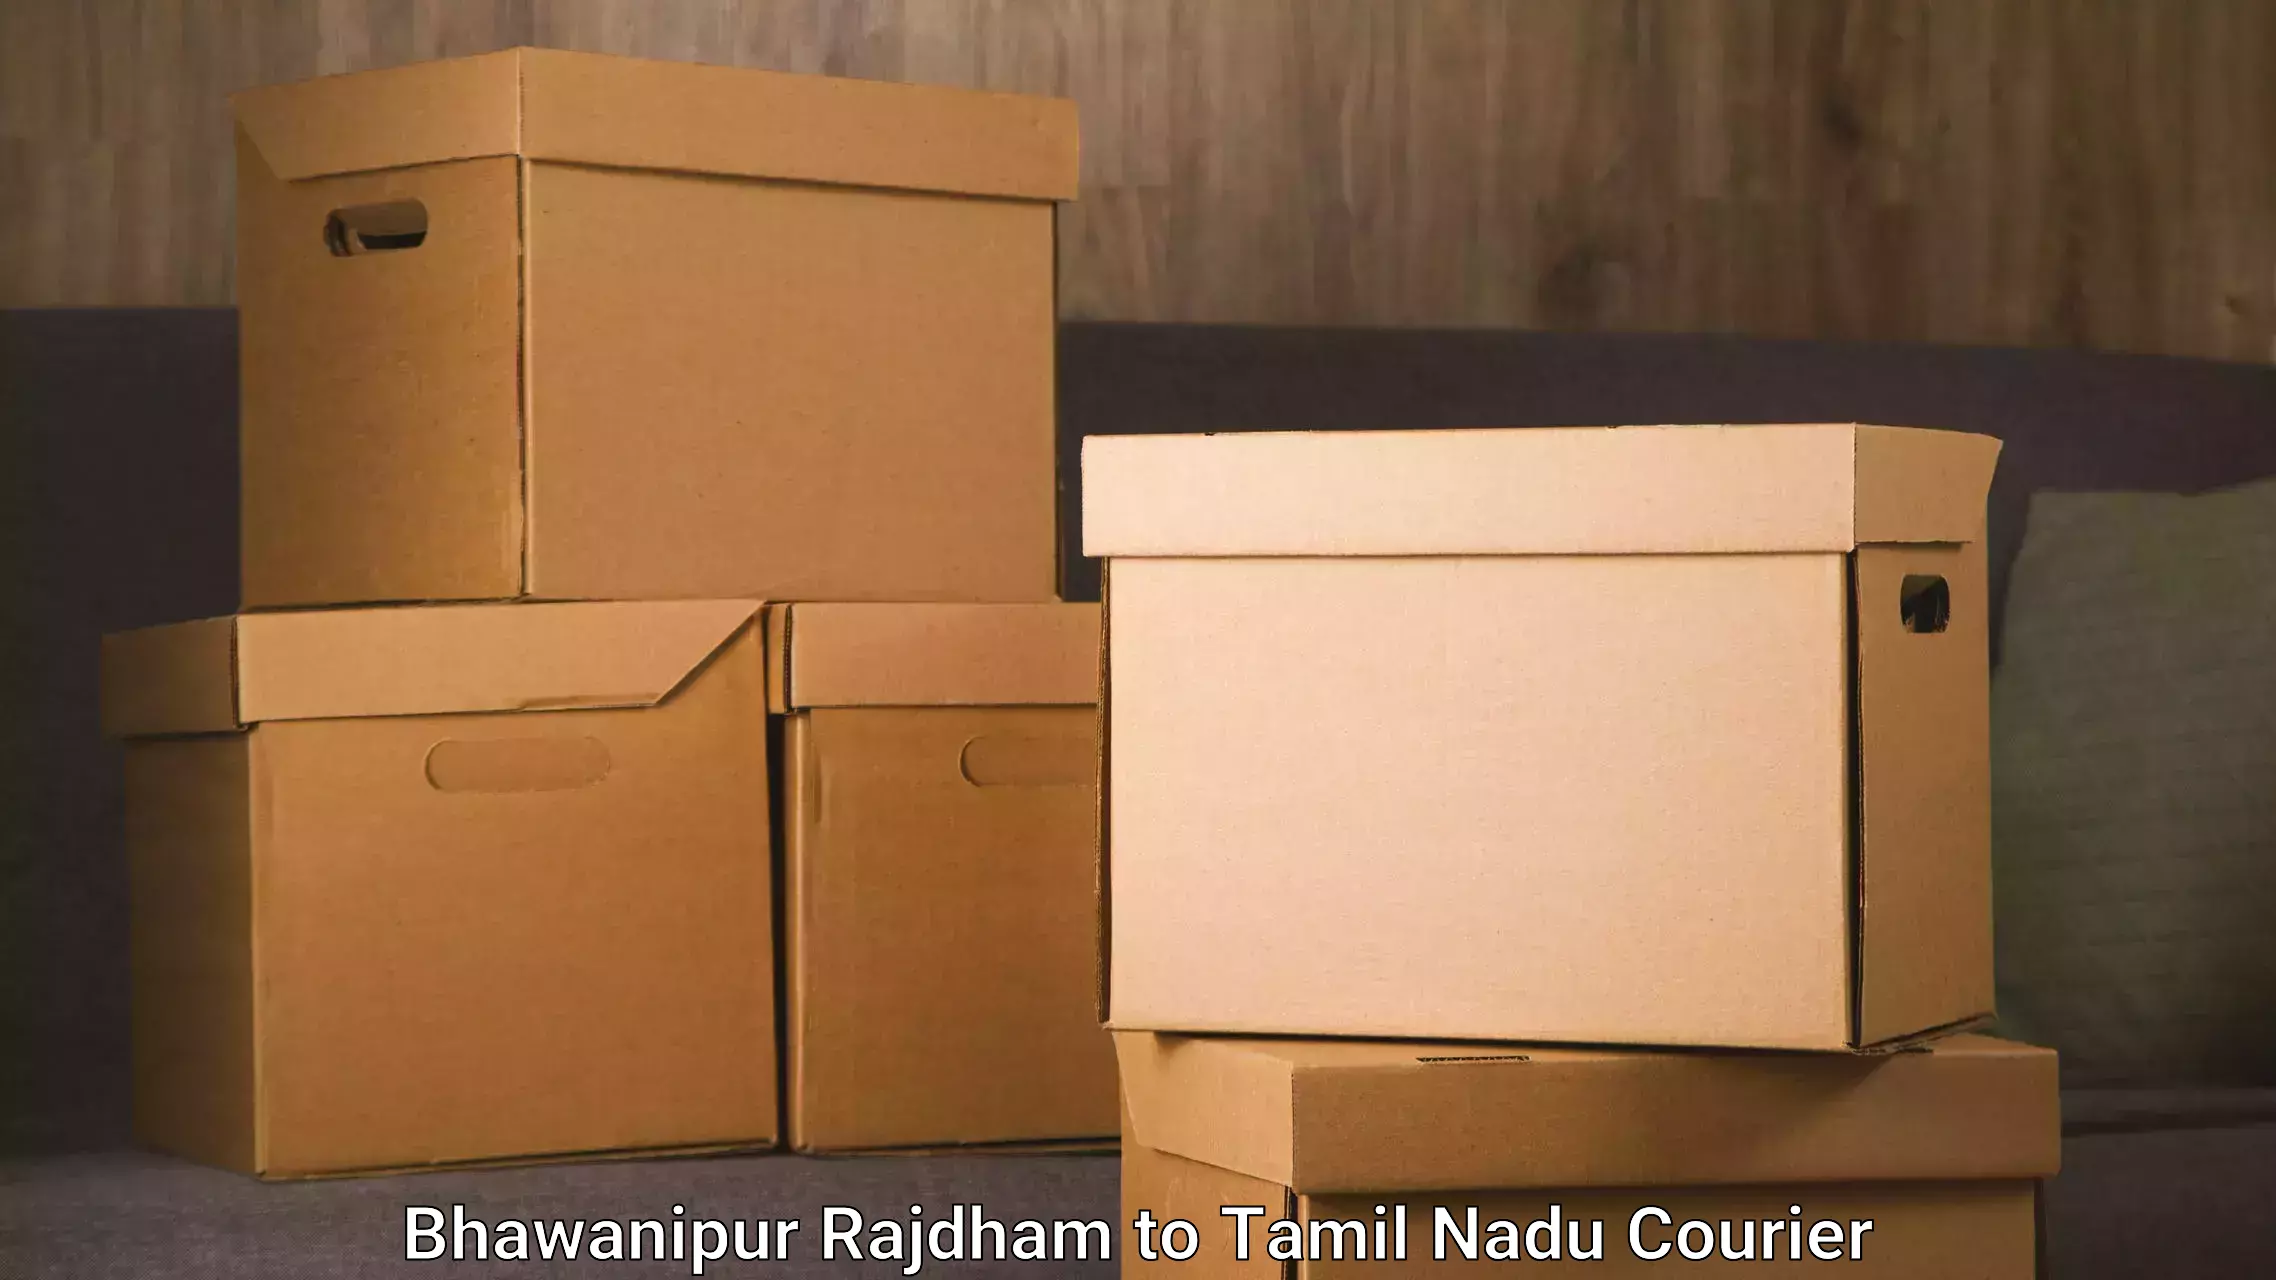 Furniture shipping services Bhawanipur Rajdham to Sri Ramachandra Institute of Higher Education and Research Chennai